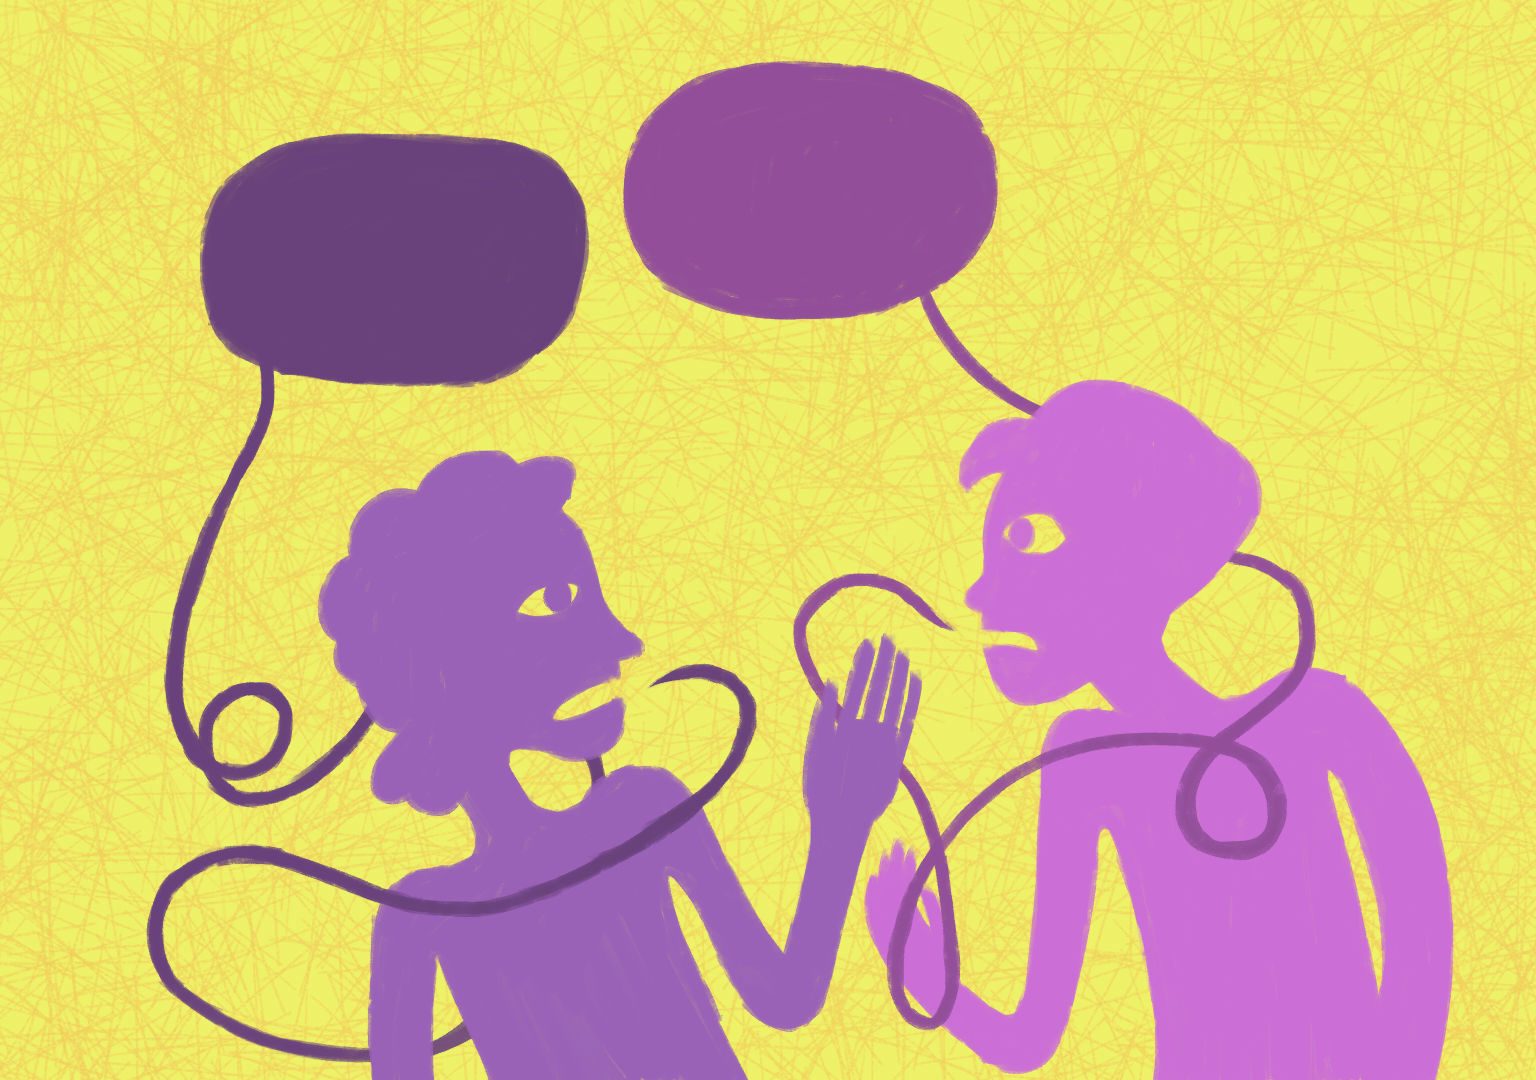 [Science Solitaire] Do we talk too much or too little in conversations?